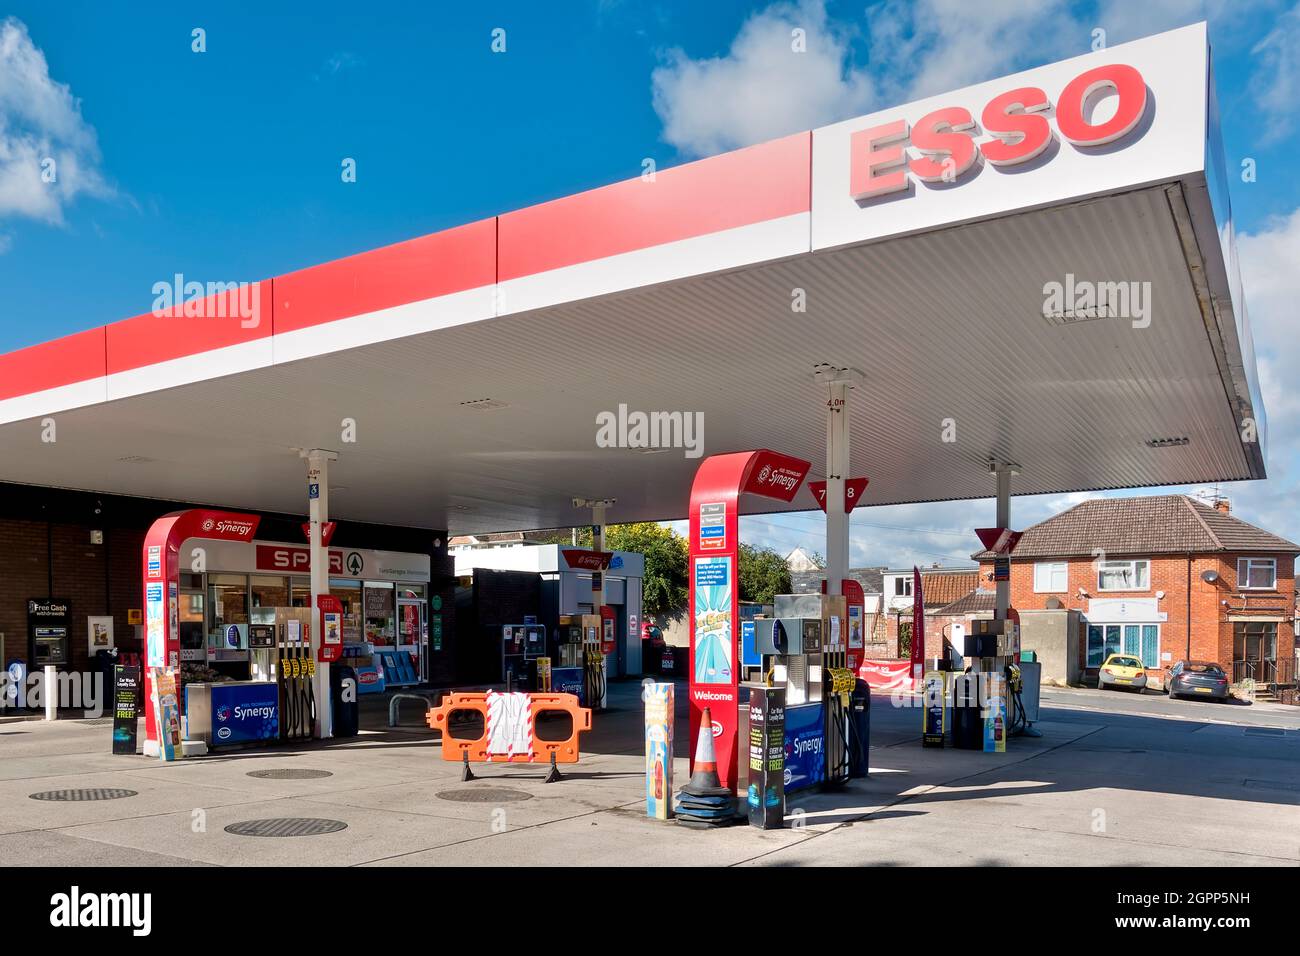 Warminster, Wiltshire, UK - 29 September 2021: An ESSO Petrol Station in East Street, Warminster, England, with no petrol. Stock Photo